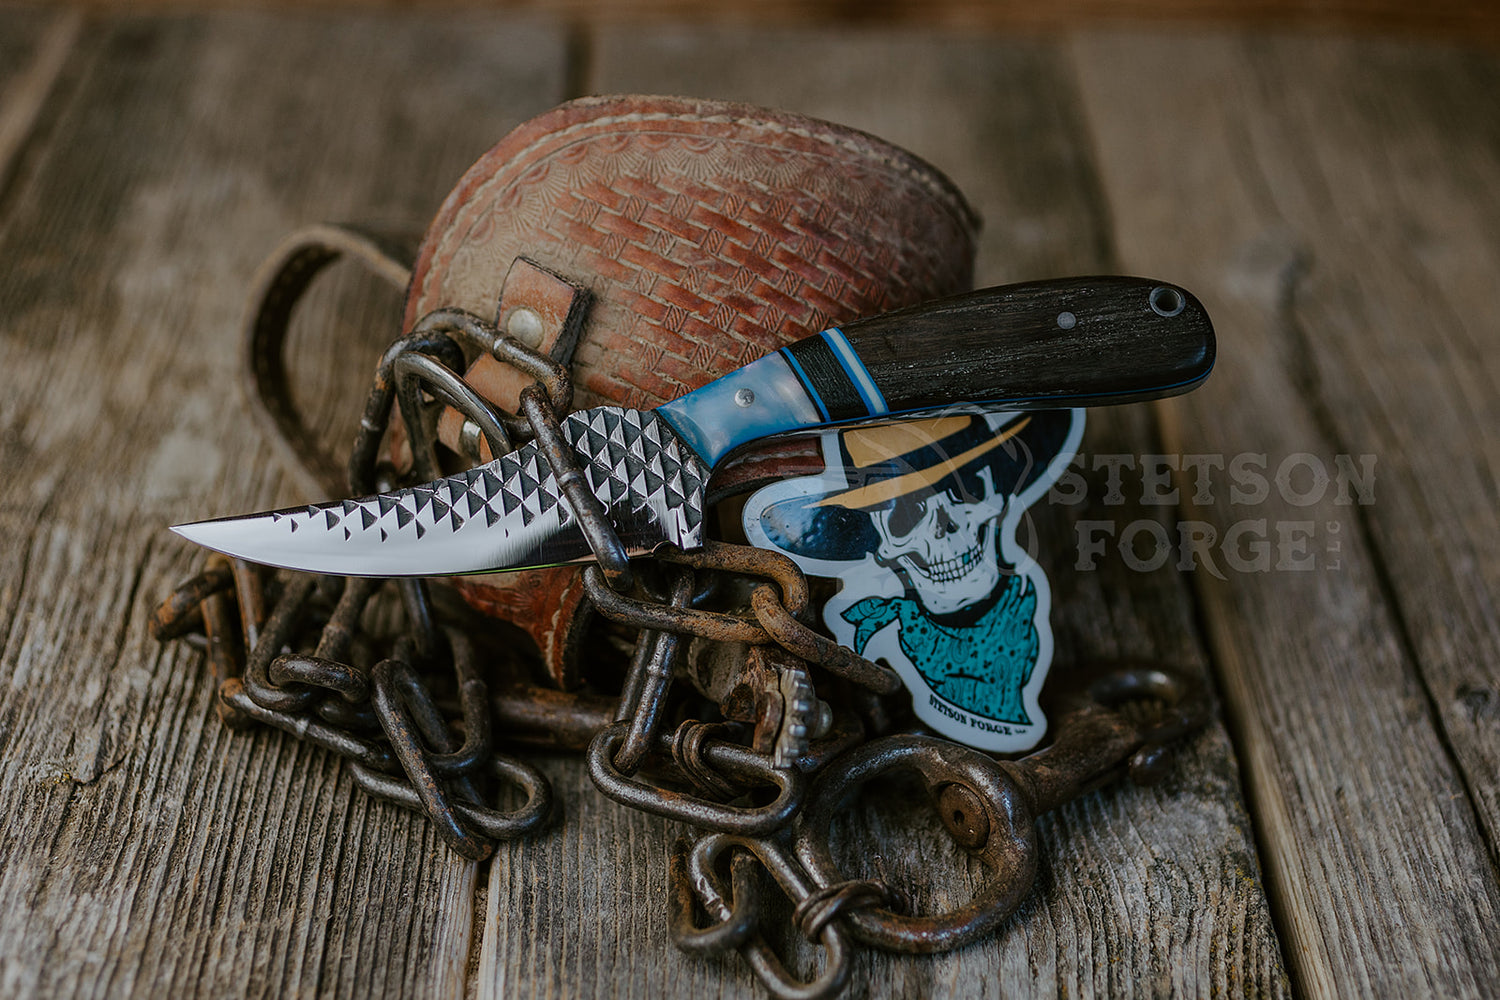 Stetson forge Coyote caper style knife with farrier rasp blade and segmented handle